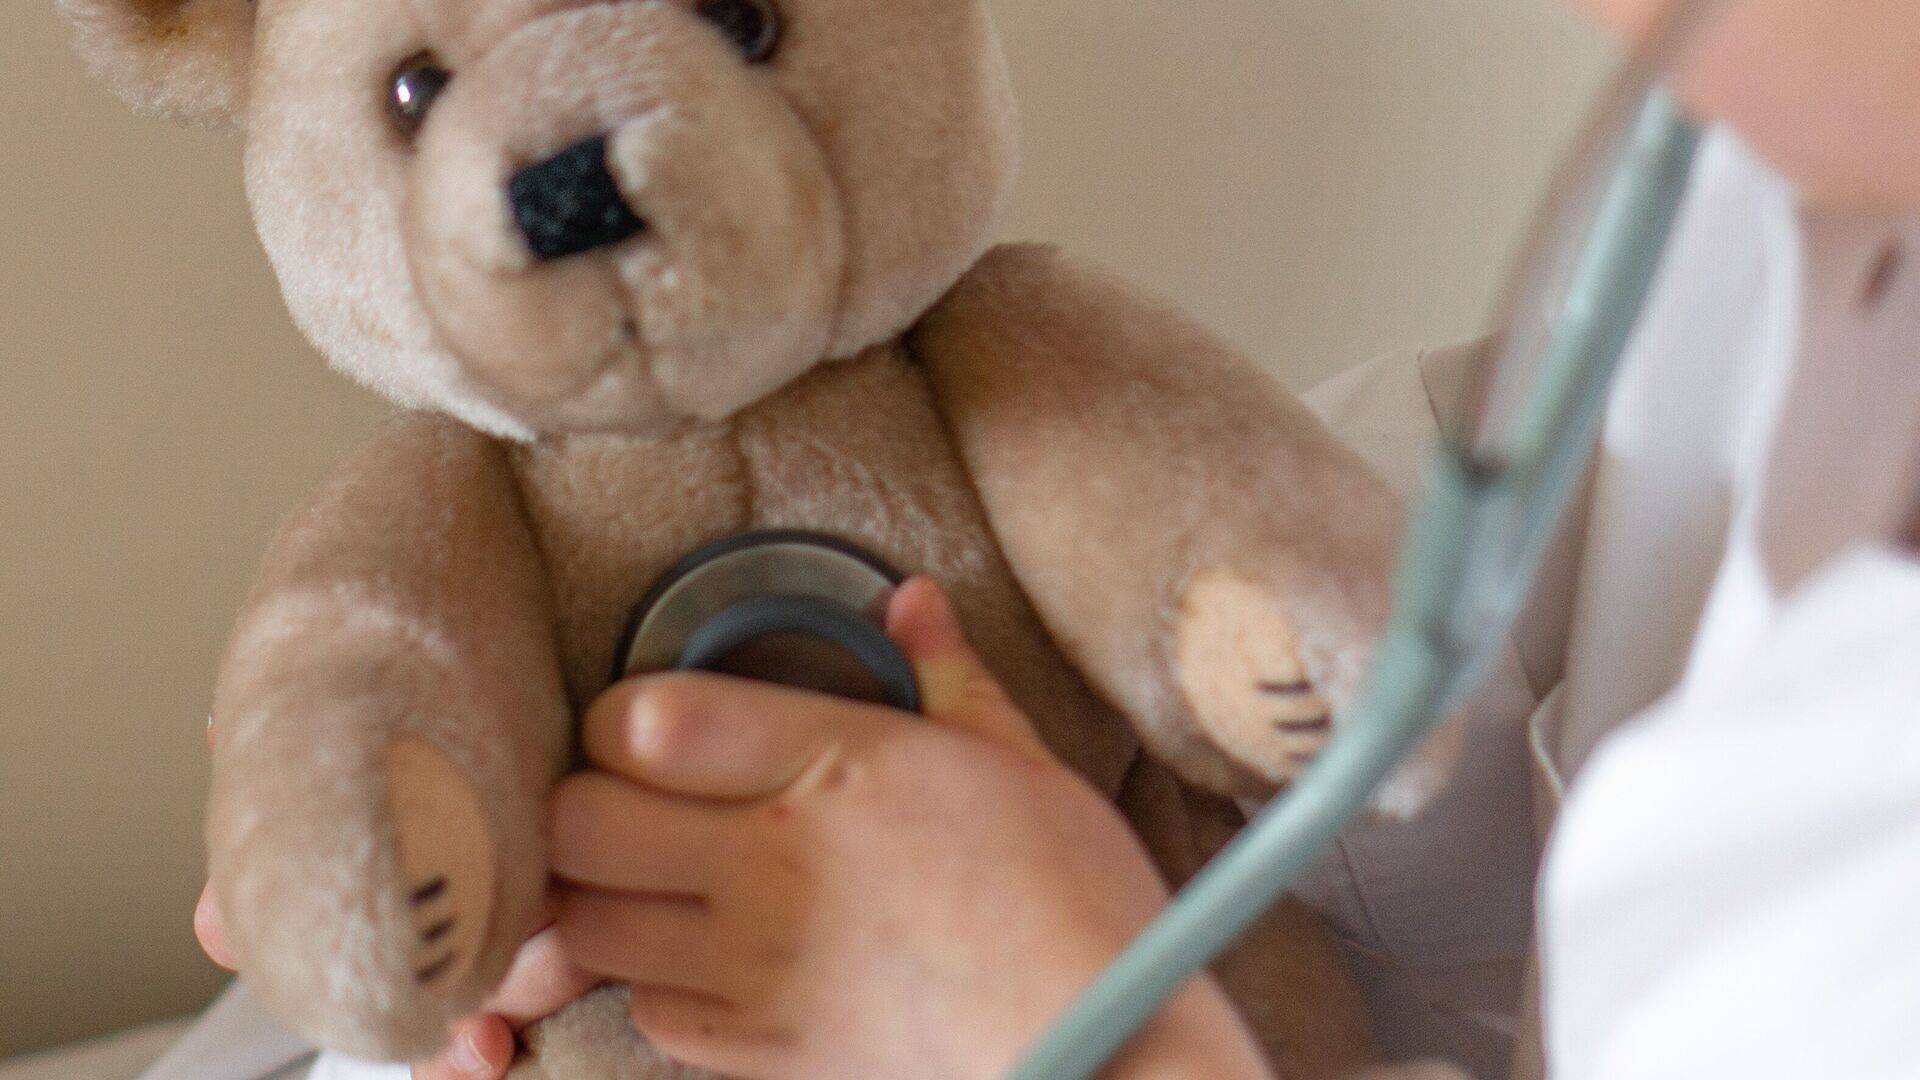 Child in a white coat playing at being a doctor – they’re using a stethoscope to examine their teddy bear